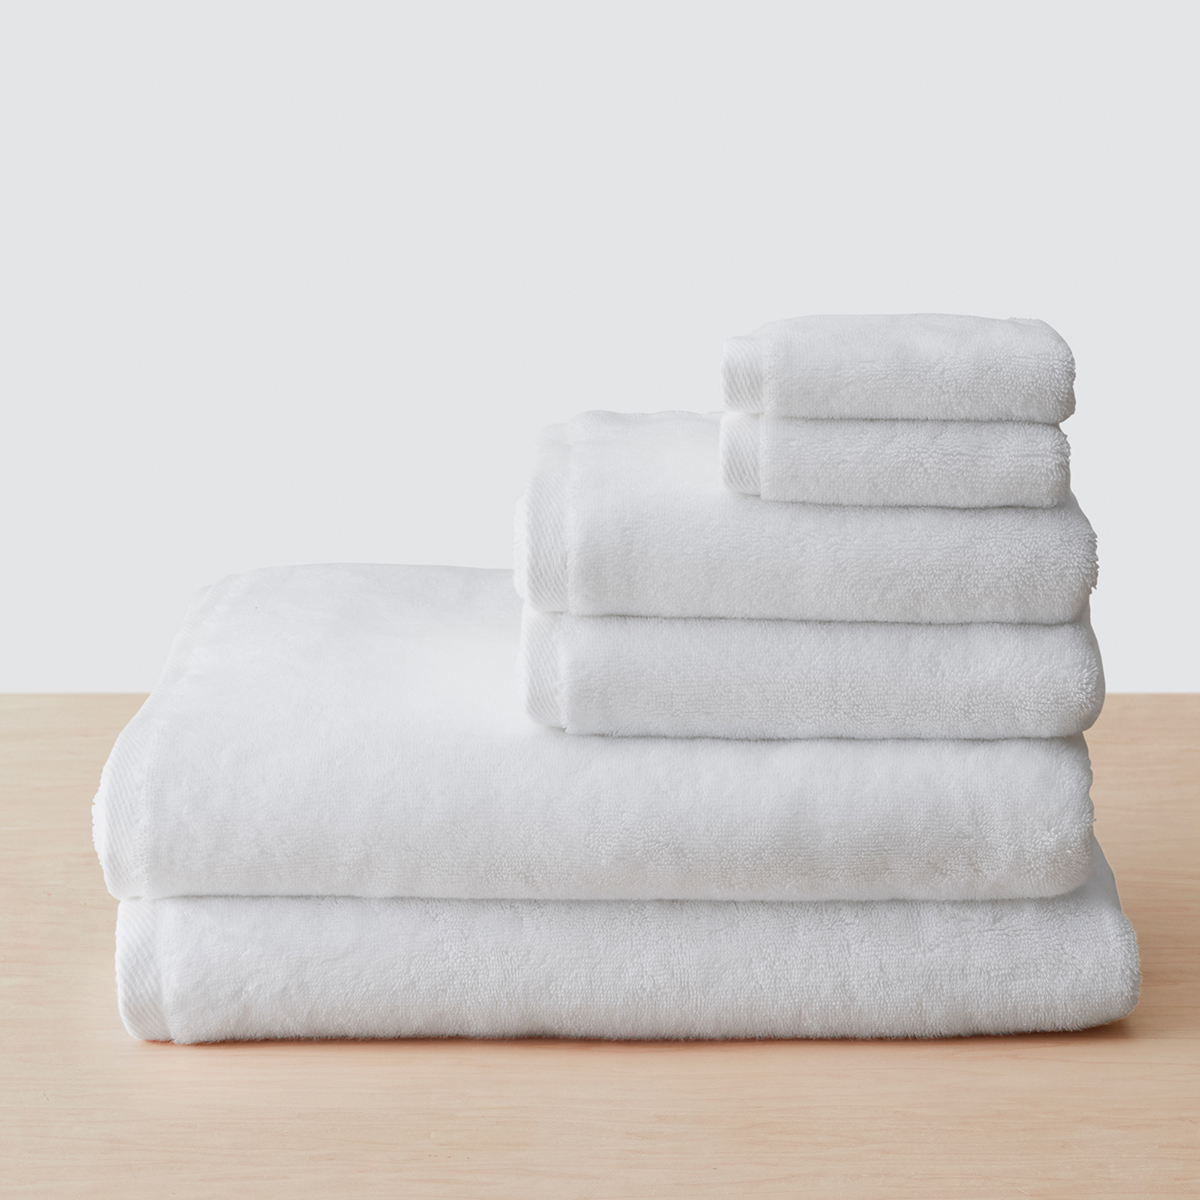 https://www.containerstore.com/catalogimages/502613/10096019-Organic_Plush_Bath_Towel_Wh.jpg